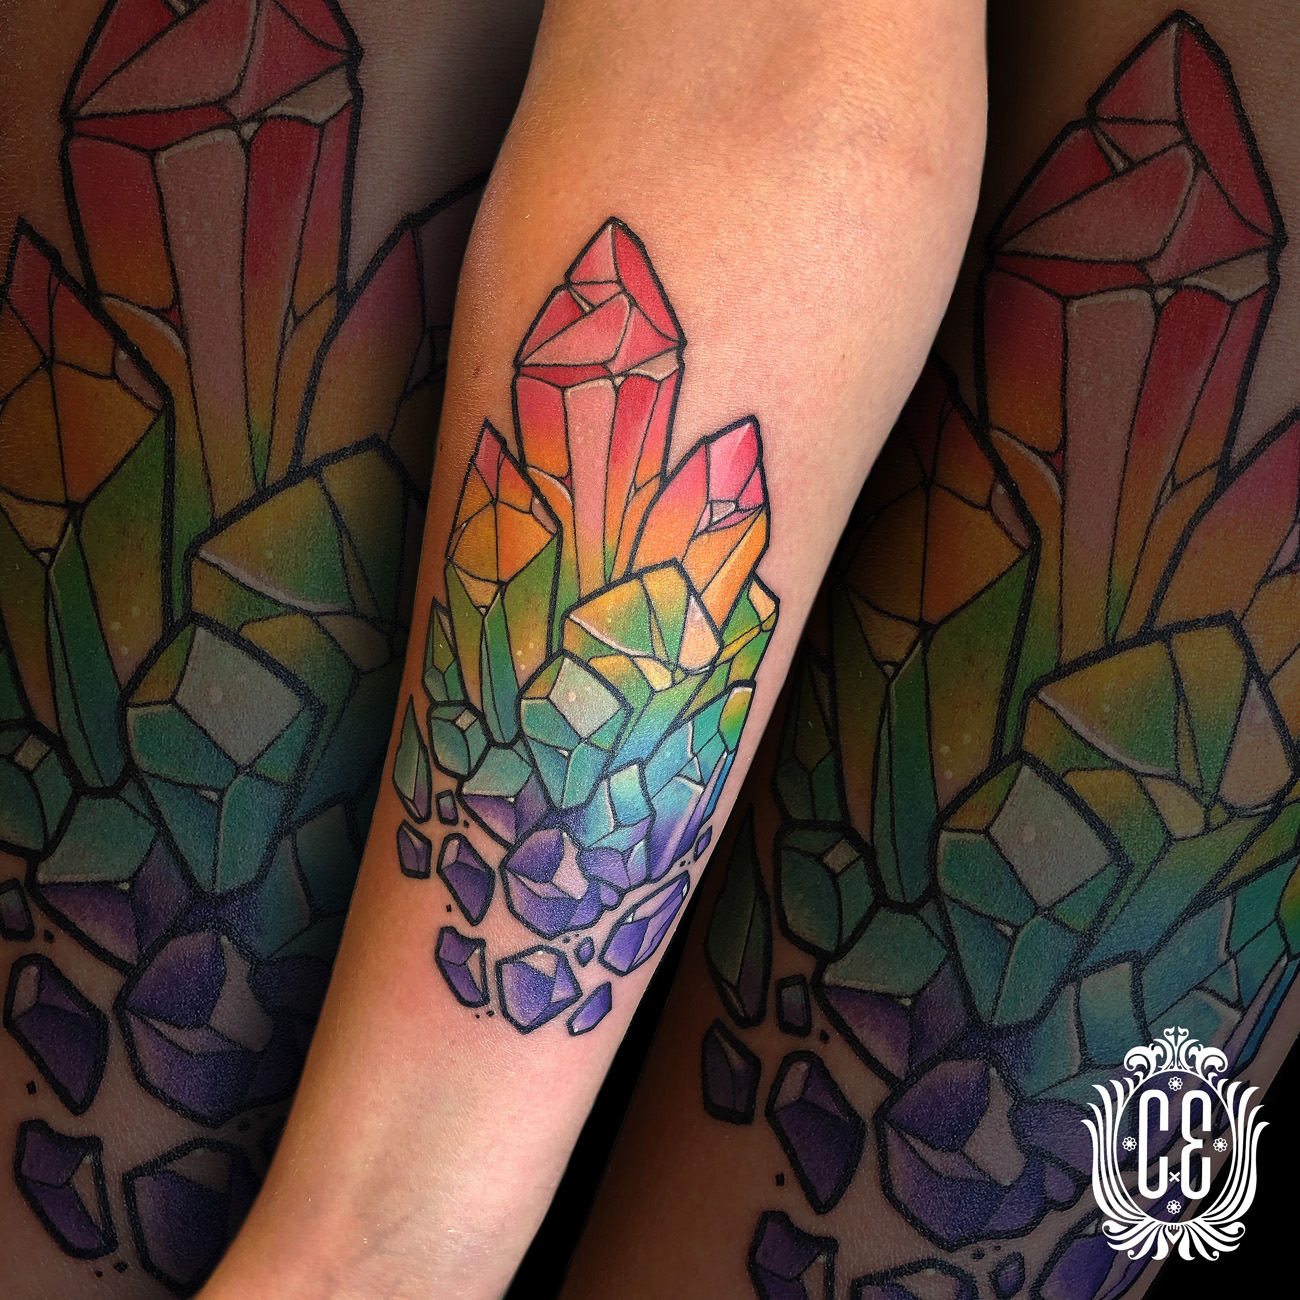 13 Tips for Perfecting the Illustrative Tattoo Style - Florida Tattoo  Academy